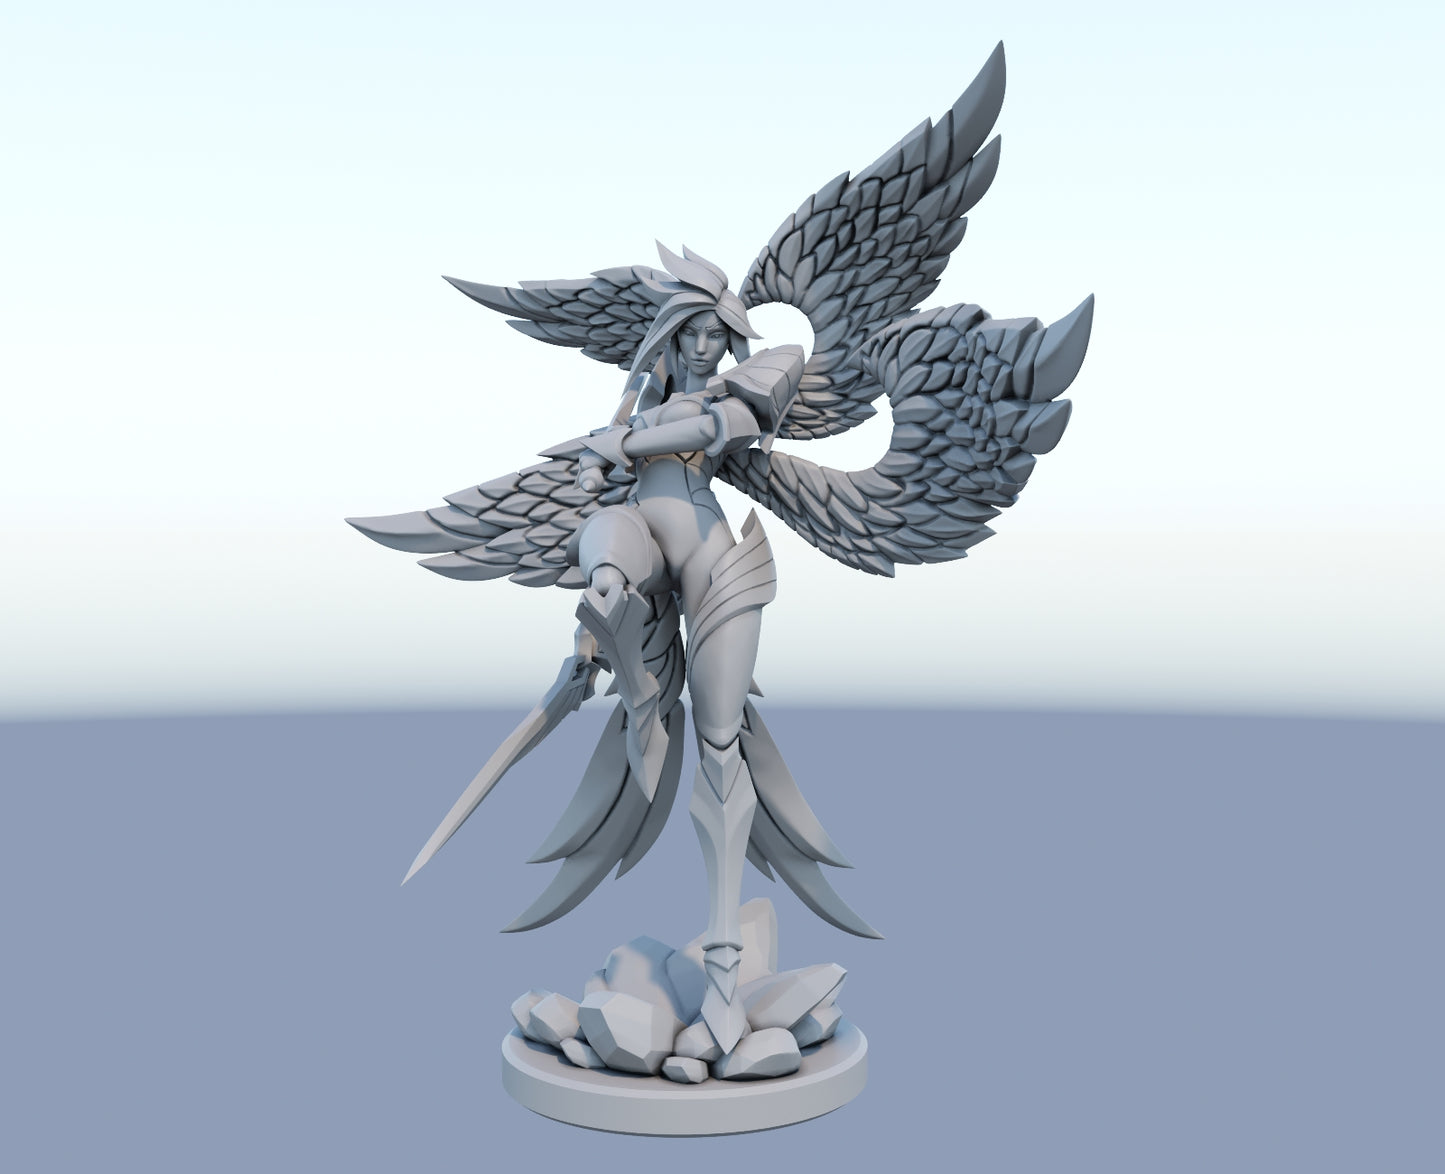 Kayle 3D-printed League of Legends champion figure. Decorate your gaming setup or home with your favorite League of Legends champion! Choose between the unpainted version, perfect for you to paint yourself, or the hand-painted version by a professional painter. Order your figure today!